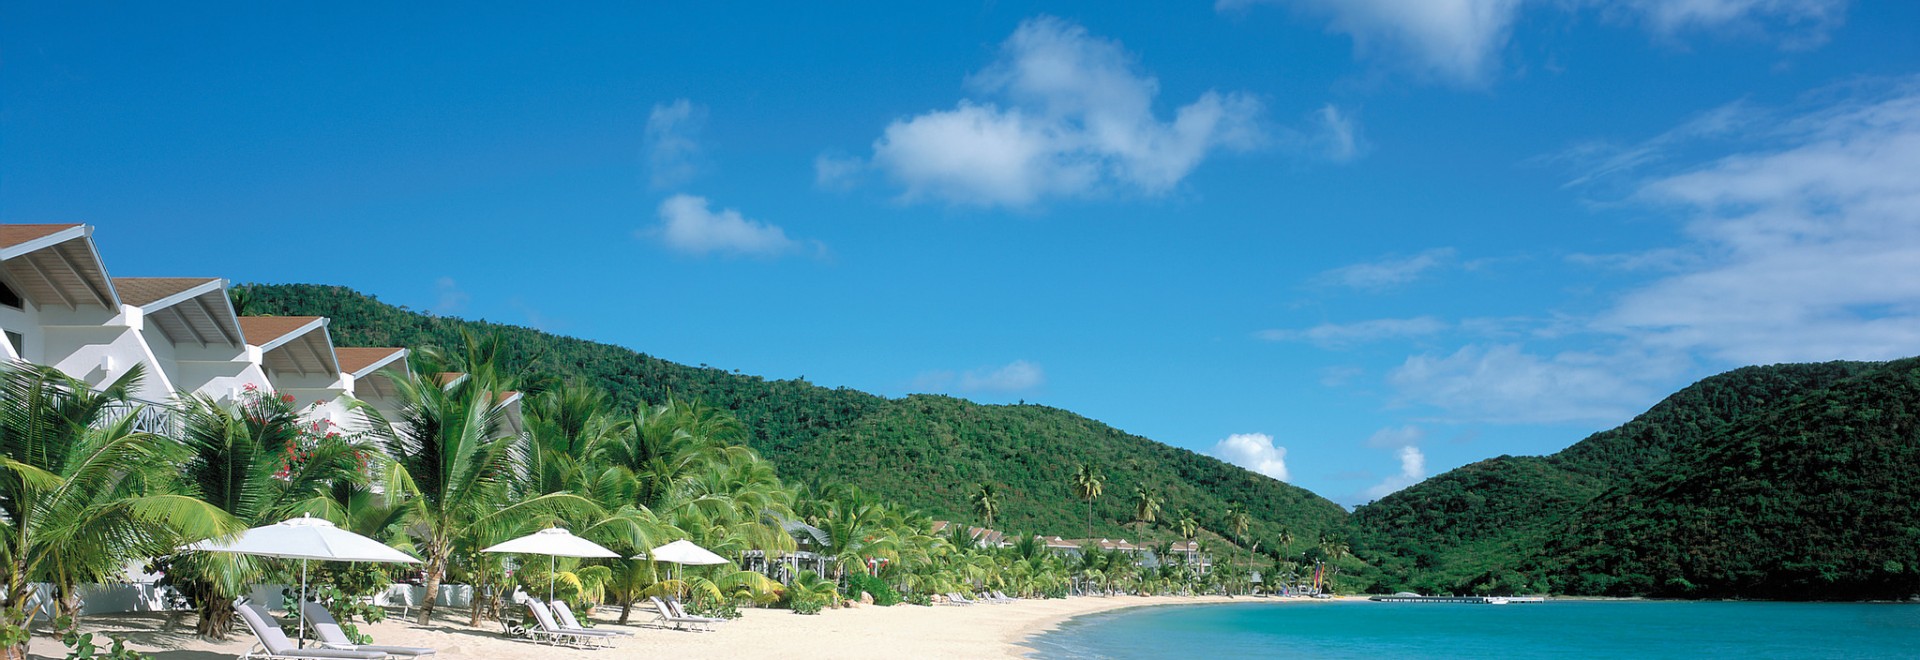 Fully Inclusive Chill out Accommodation Special - Carlisle Bay, Antigua